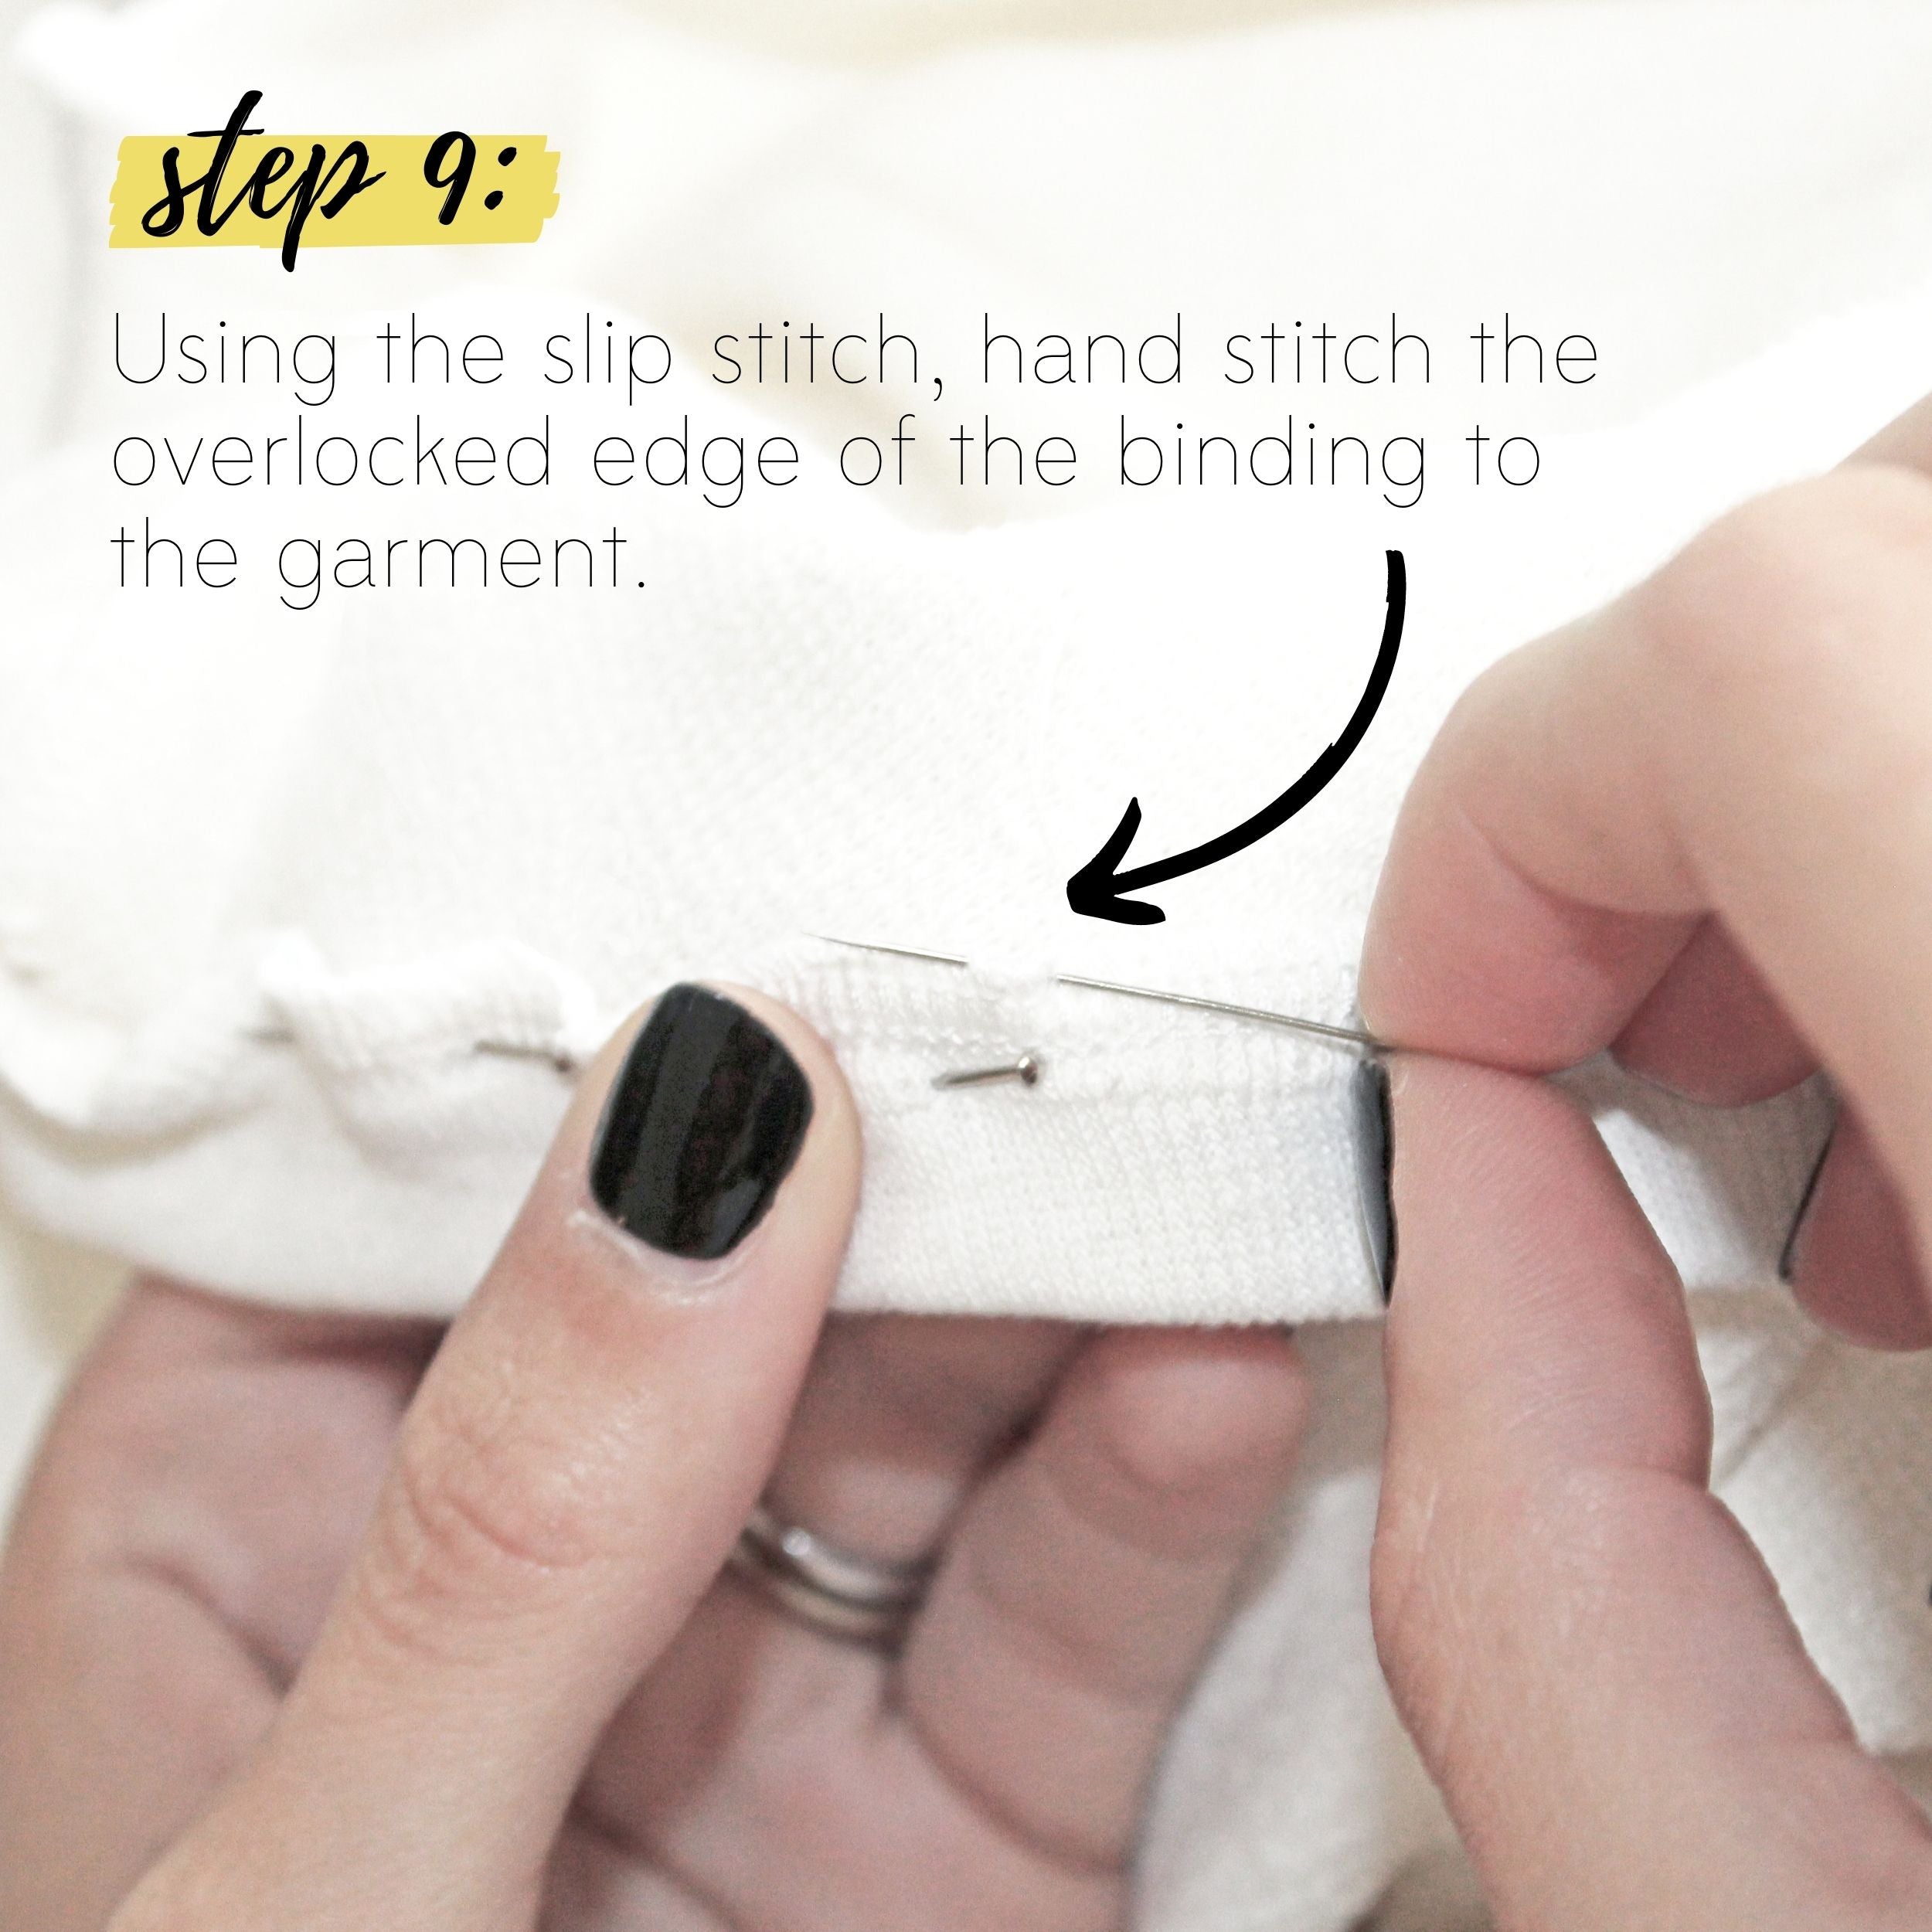 How To Sew A Knit Seam Binding Sewing Tutorial: Step 9